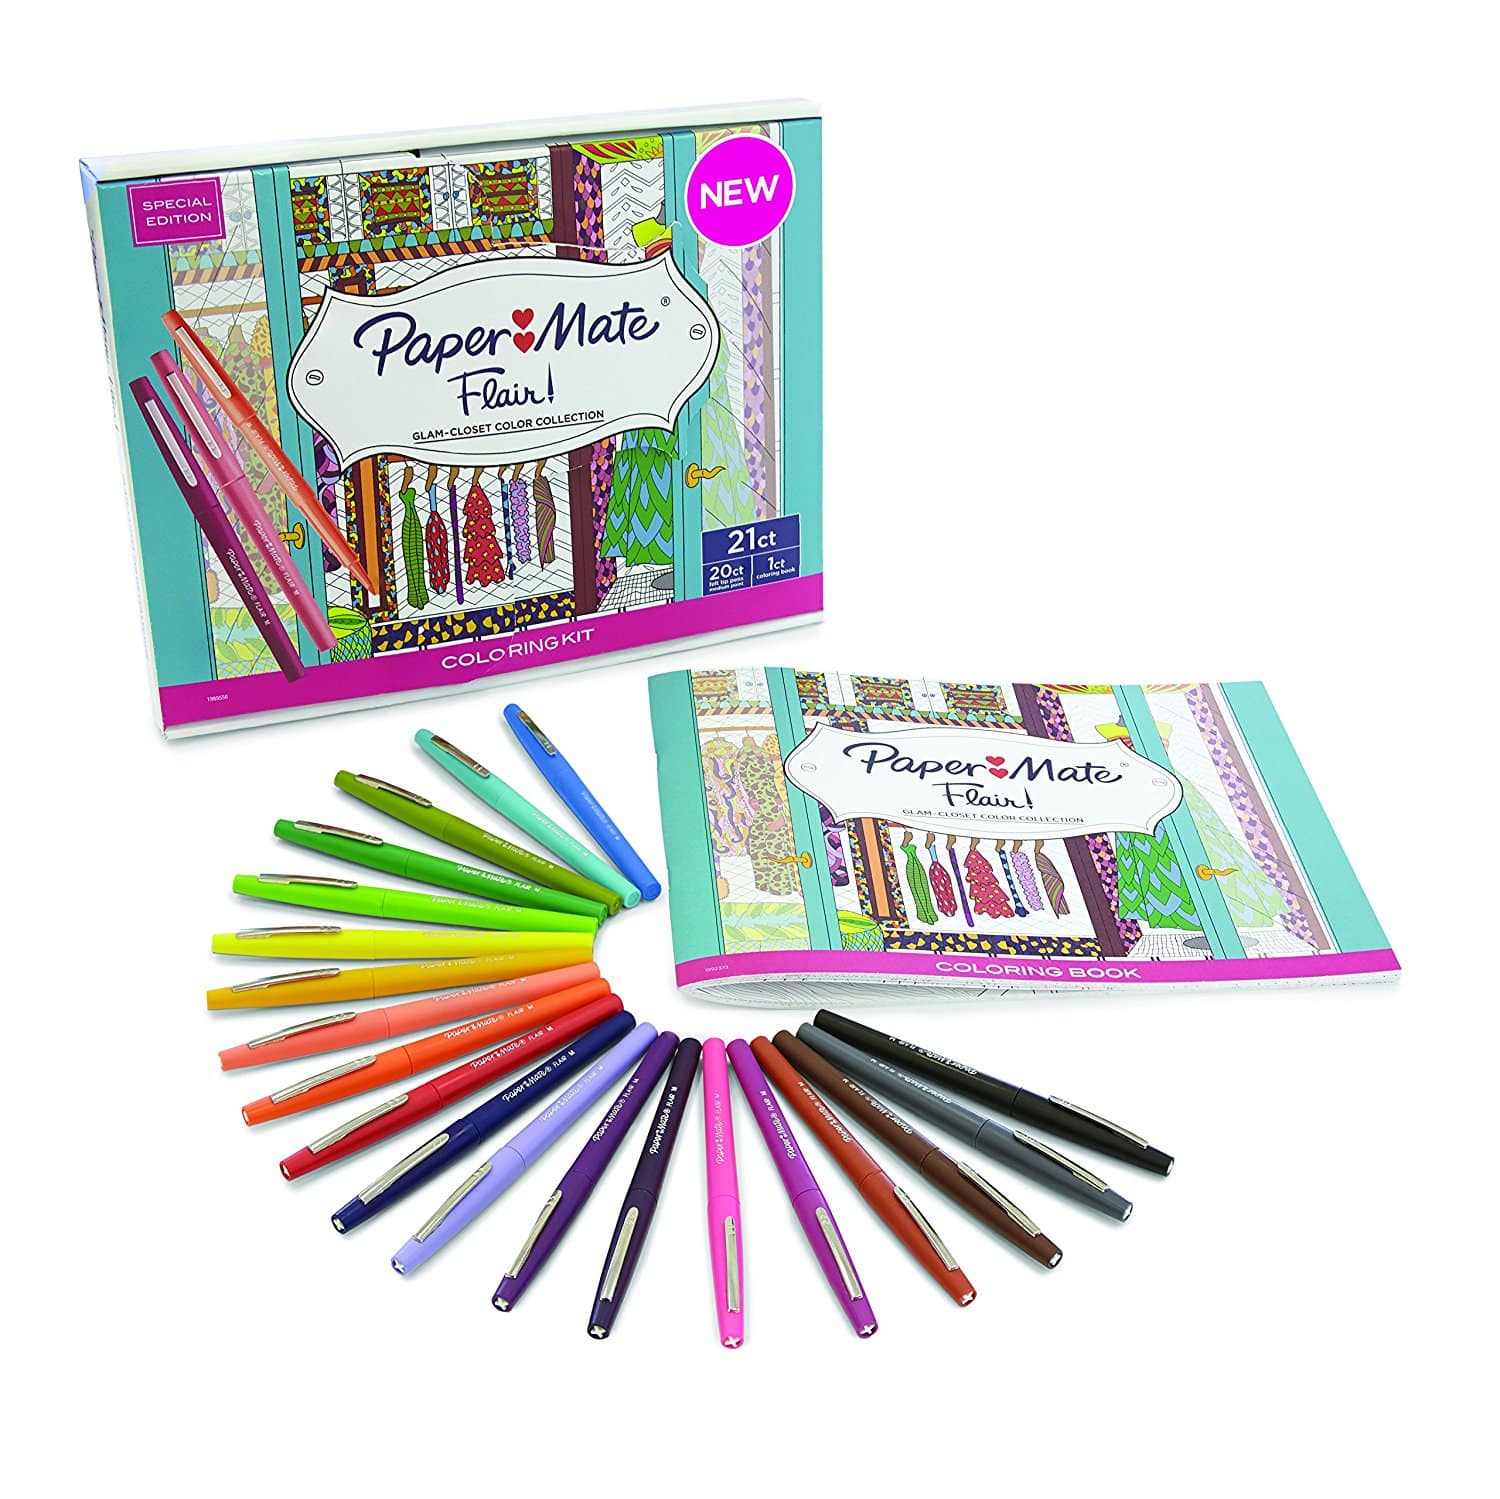 DEAL ALERT: These are a STEAL – 20 Paper Mate Flair Felt Tip Pens 76% off!